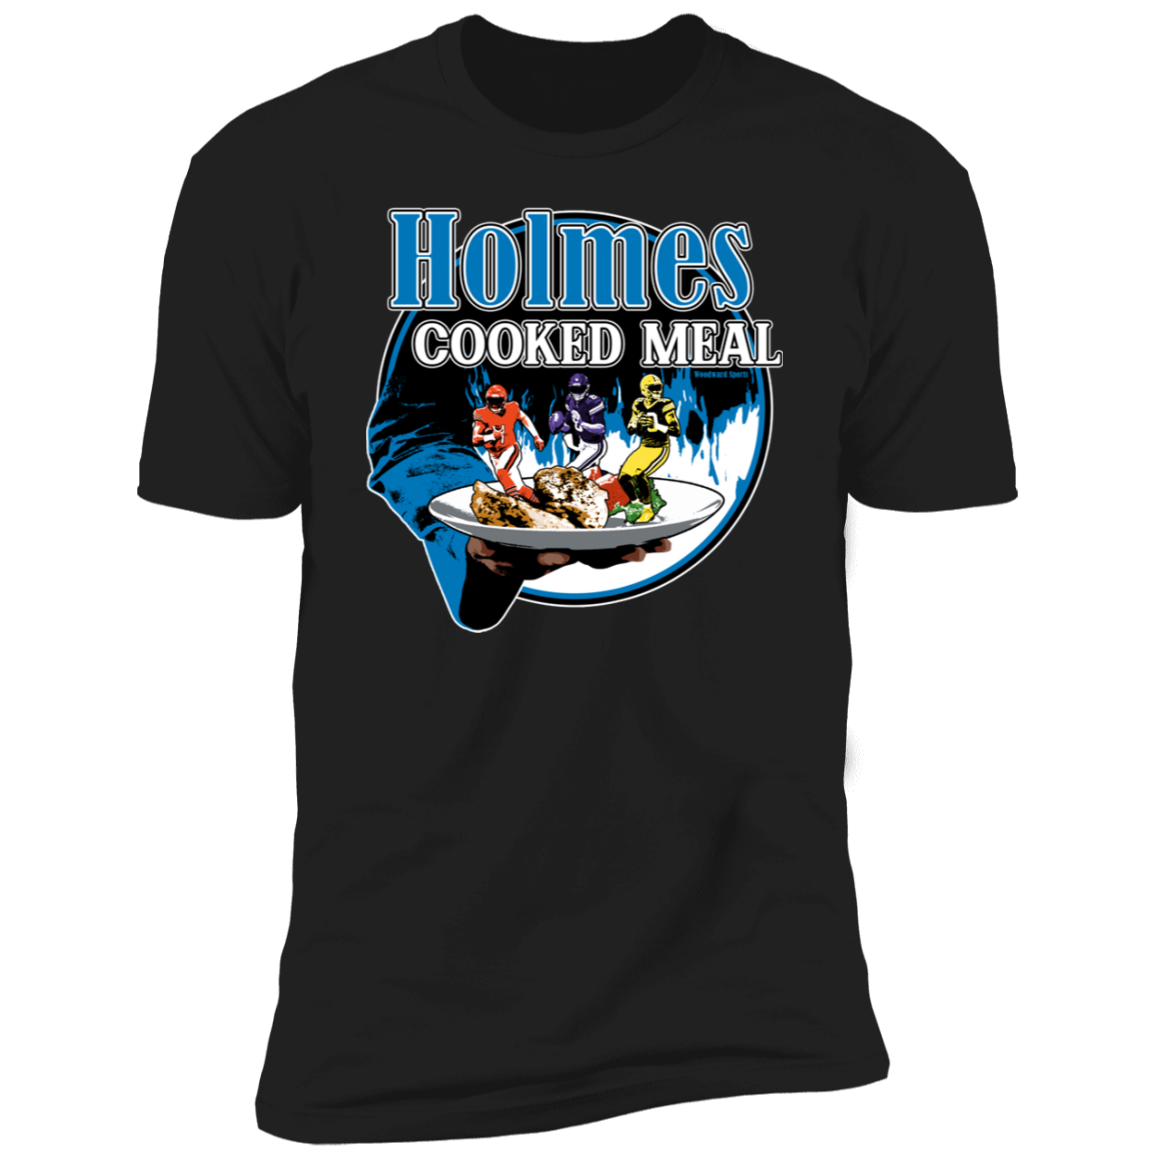 Holmes Cooked Meal Tee